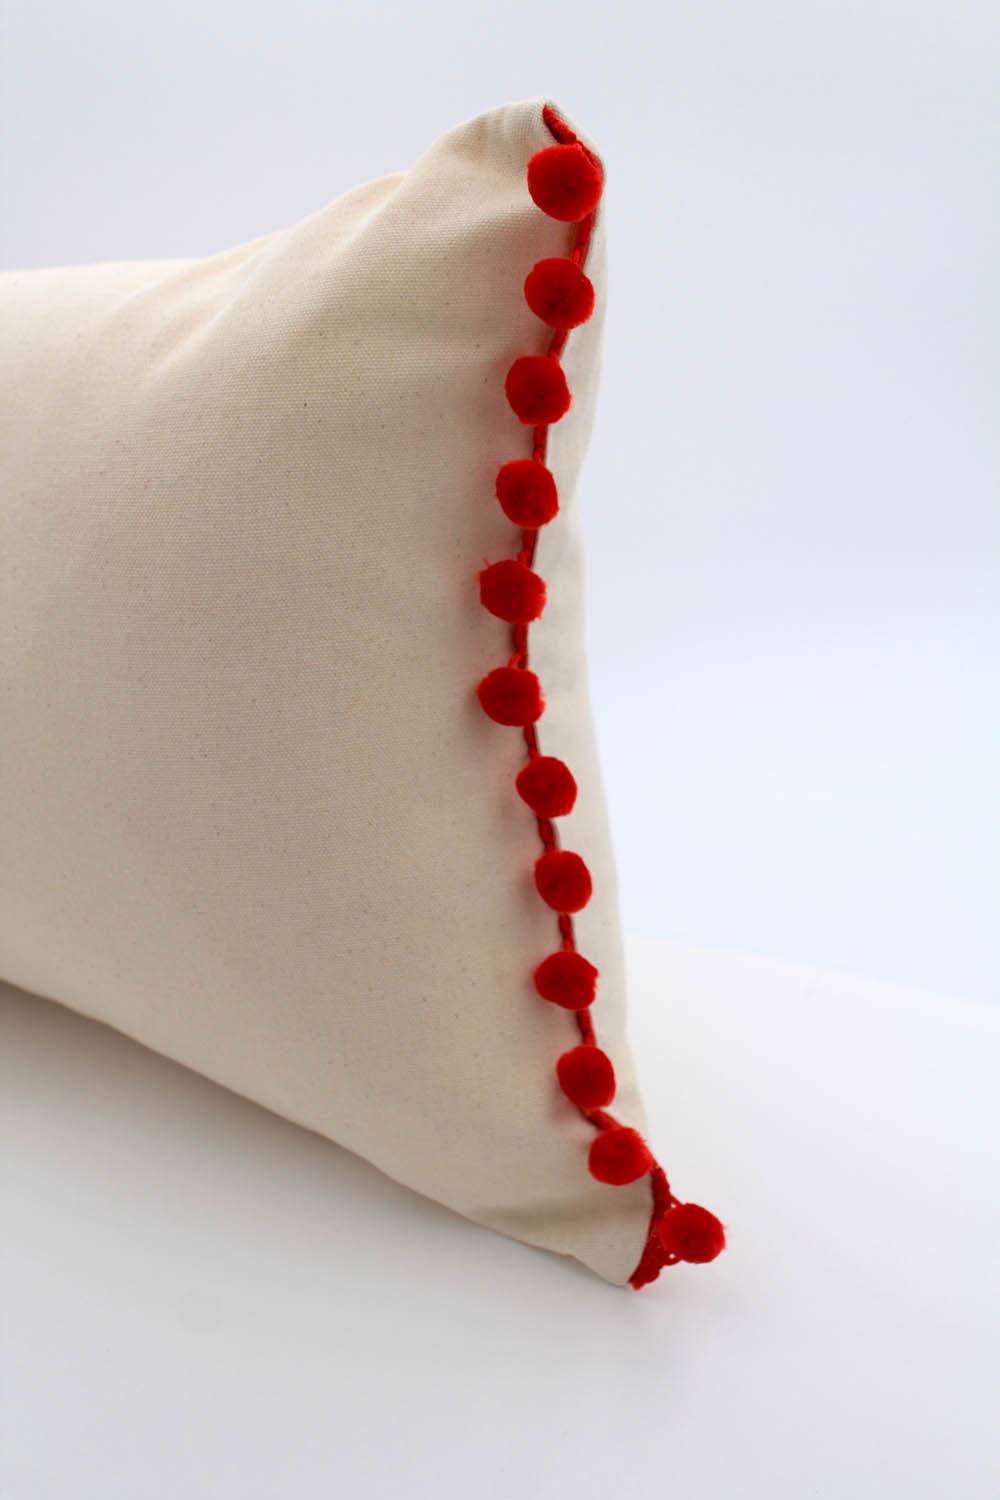 El Mar Pillow Collection: Natural with Red Pom Poms